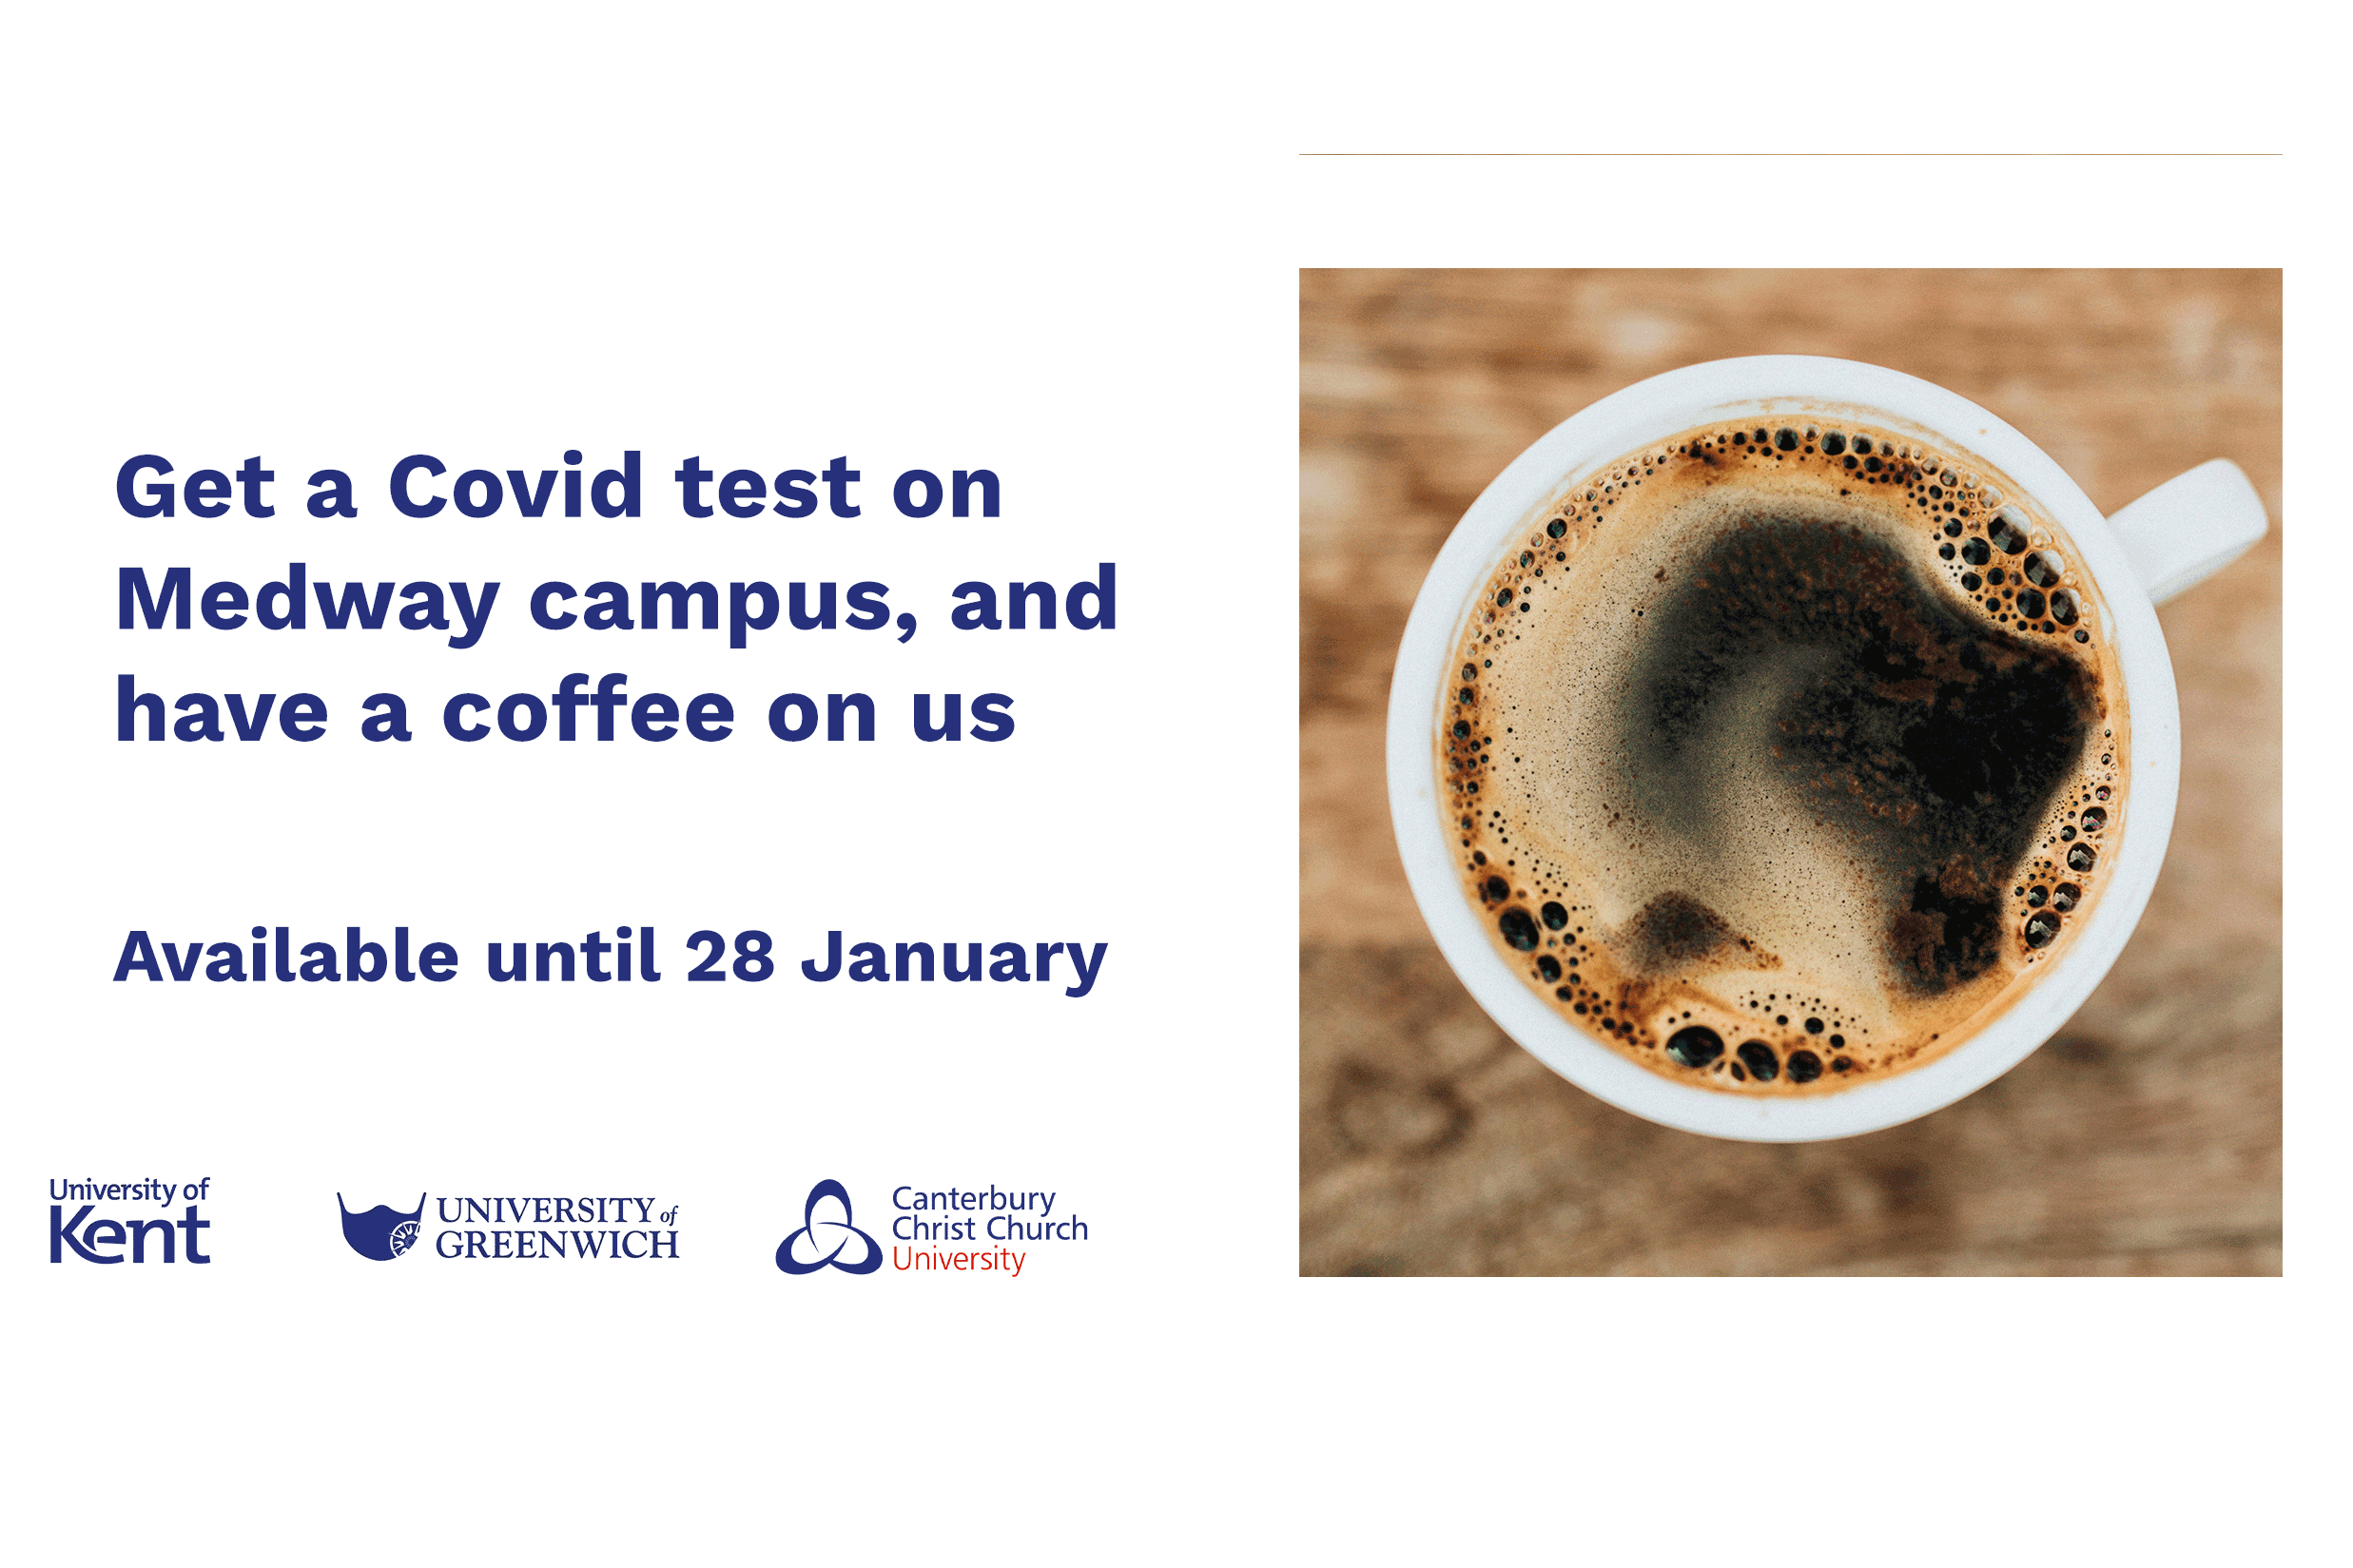 Get a Covid tet on Medway campus and get a free coffee on us. Available until 28 January.